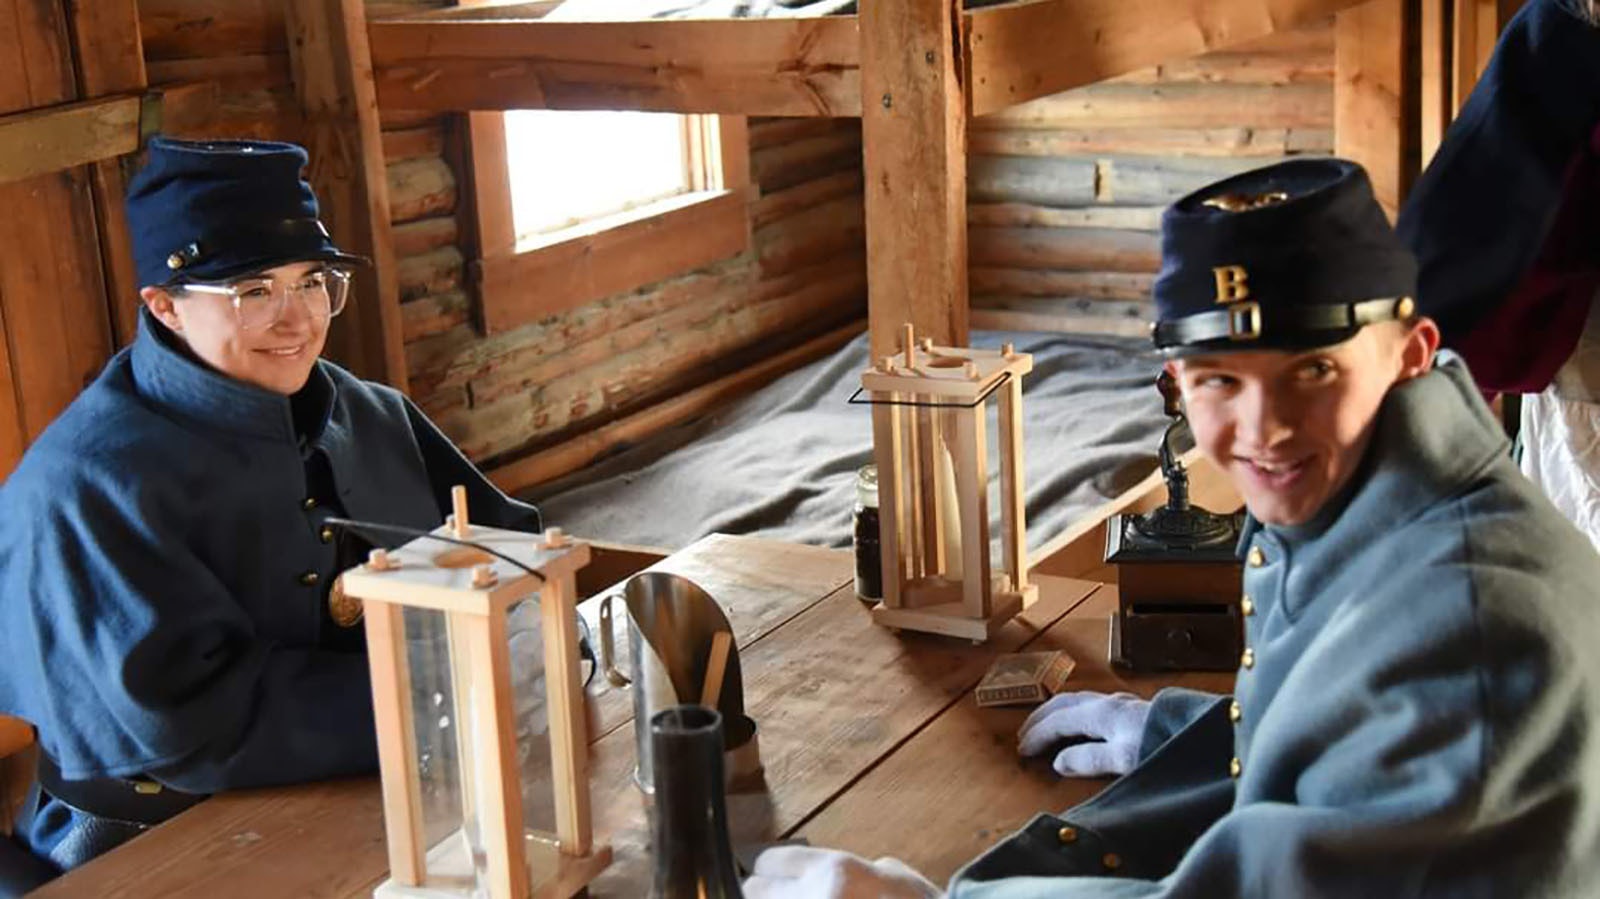 The Platte Bridge Company has a strong contingent of young re-enactors and has a goal of teaching them leadership and public speaking skills.